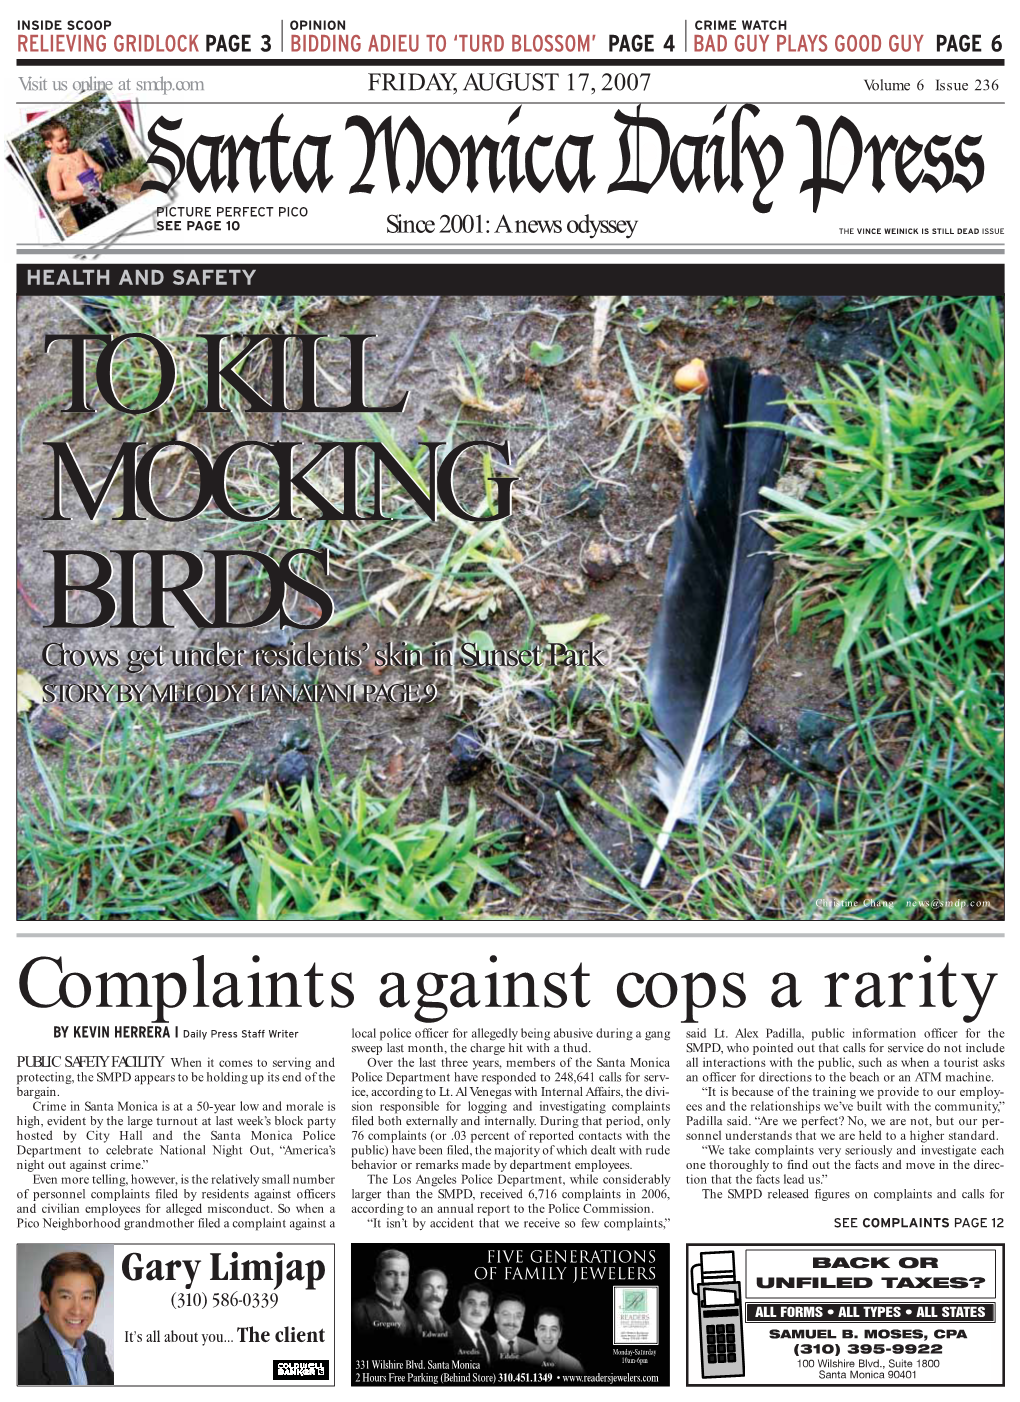 Complaints Against Cops a Rarity by KEVIN HERRERA I Daily Press Staff Writer Local Police Officer for Allegedly Being Abusive During a Gang Said Lt